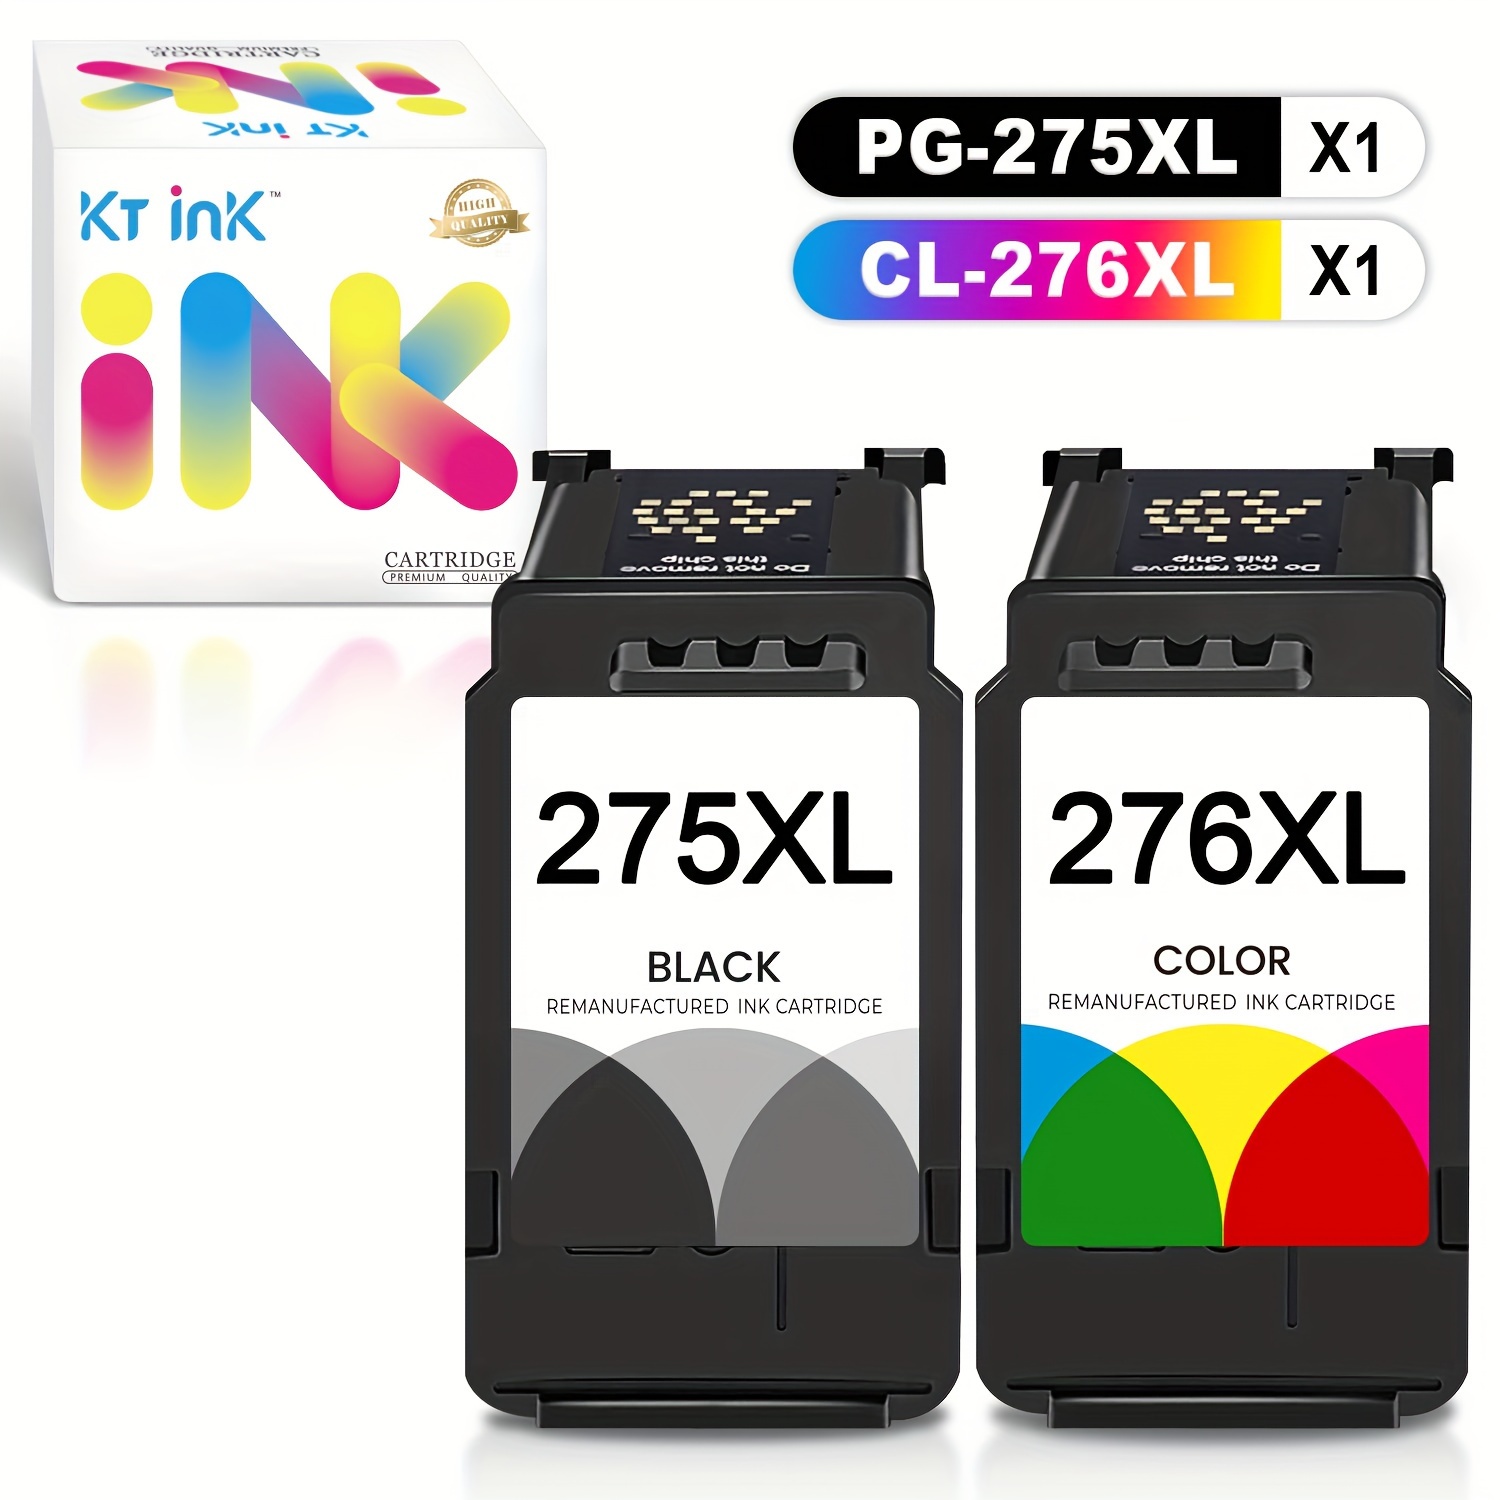 

Pg275xl Black Cl276xl Color Remanufactured Ink Cartridge Compatible For Ts3520/ts3500//tr4720/tr4700/tr4722 Printers